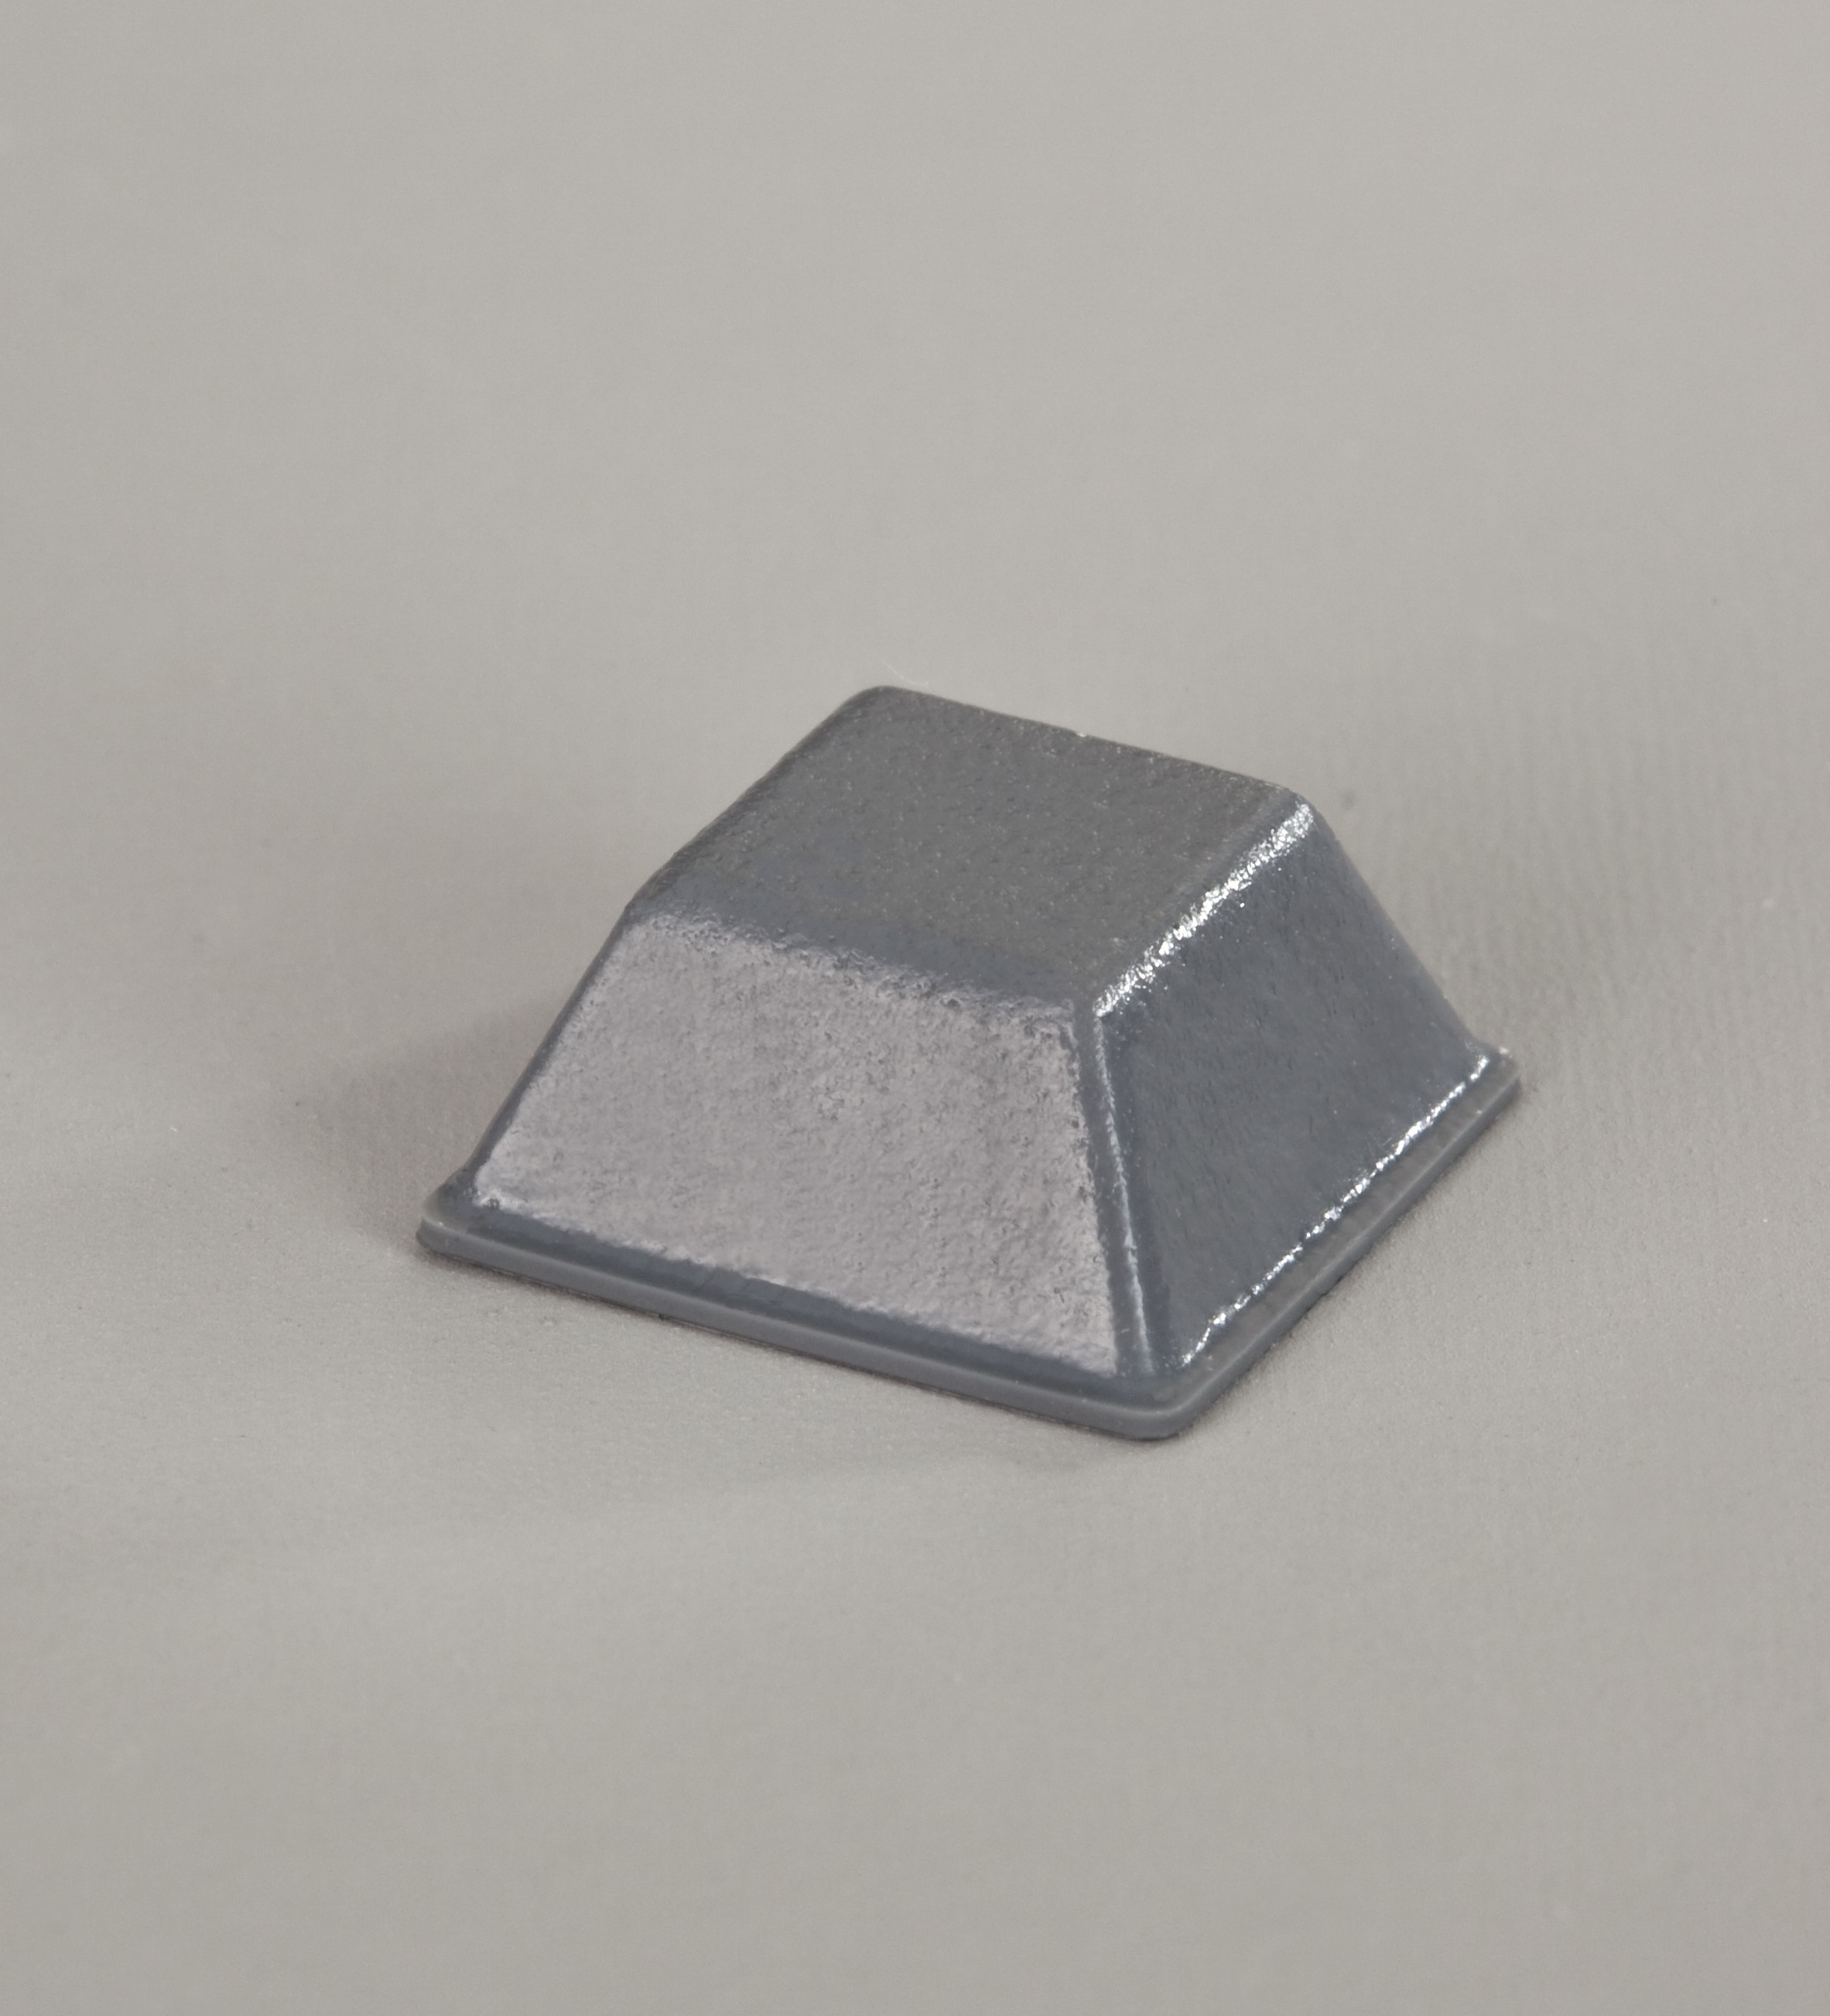 BS-03 GREY product image